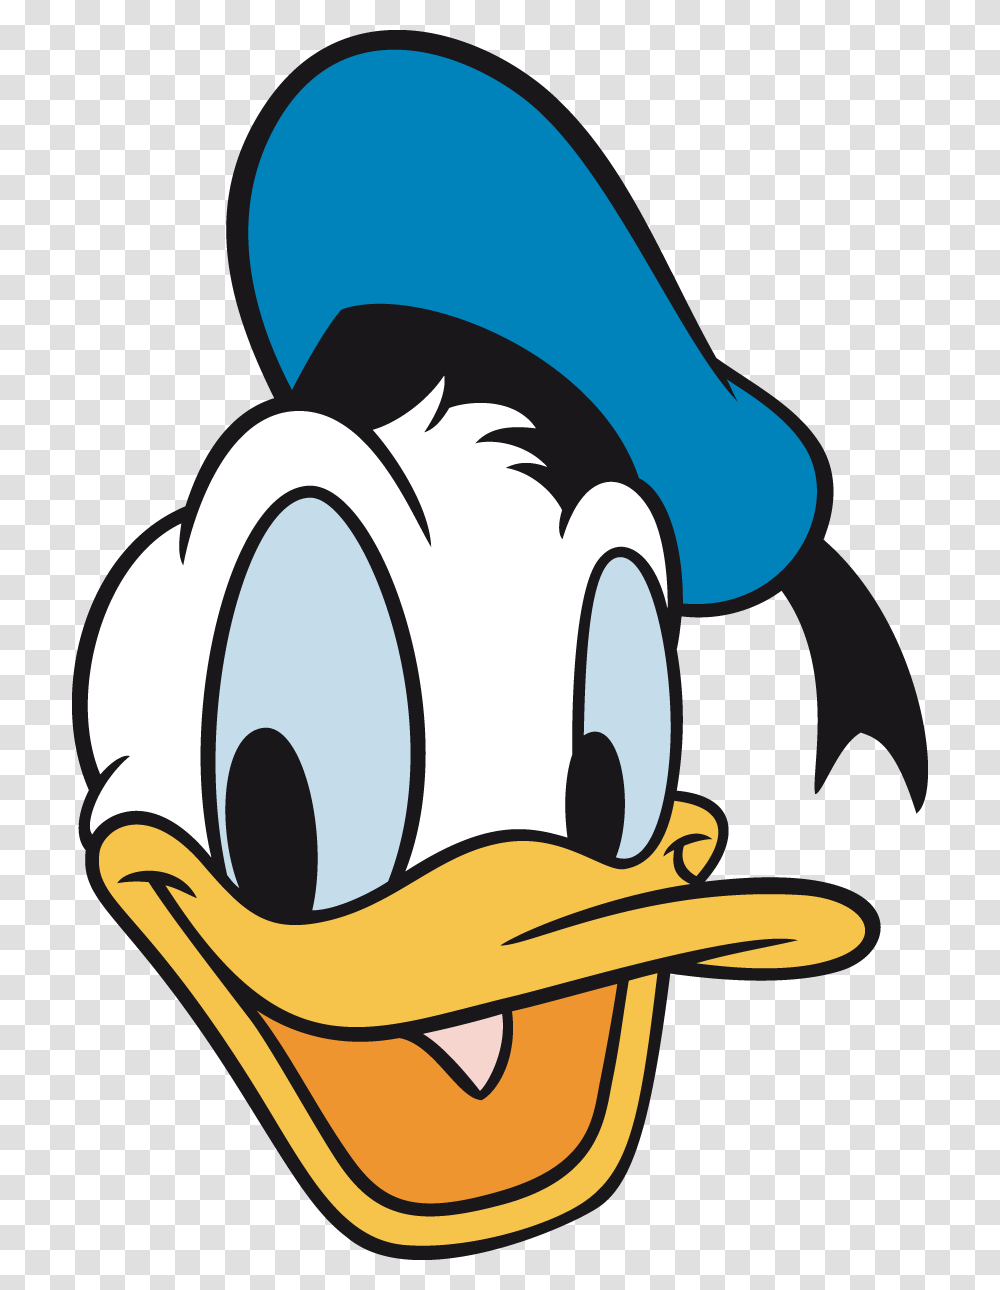 Donald Duck Smiling Image Face Of Donald Duck, Goggles, Building, Pillow, Cushion Transparent Png